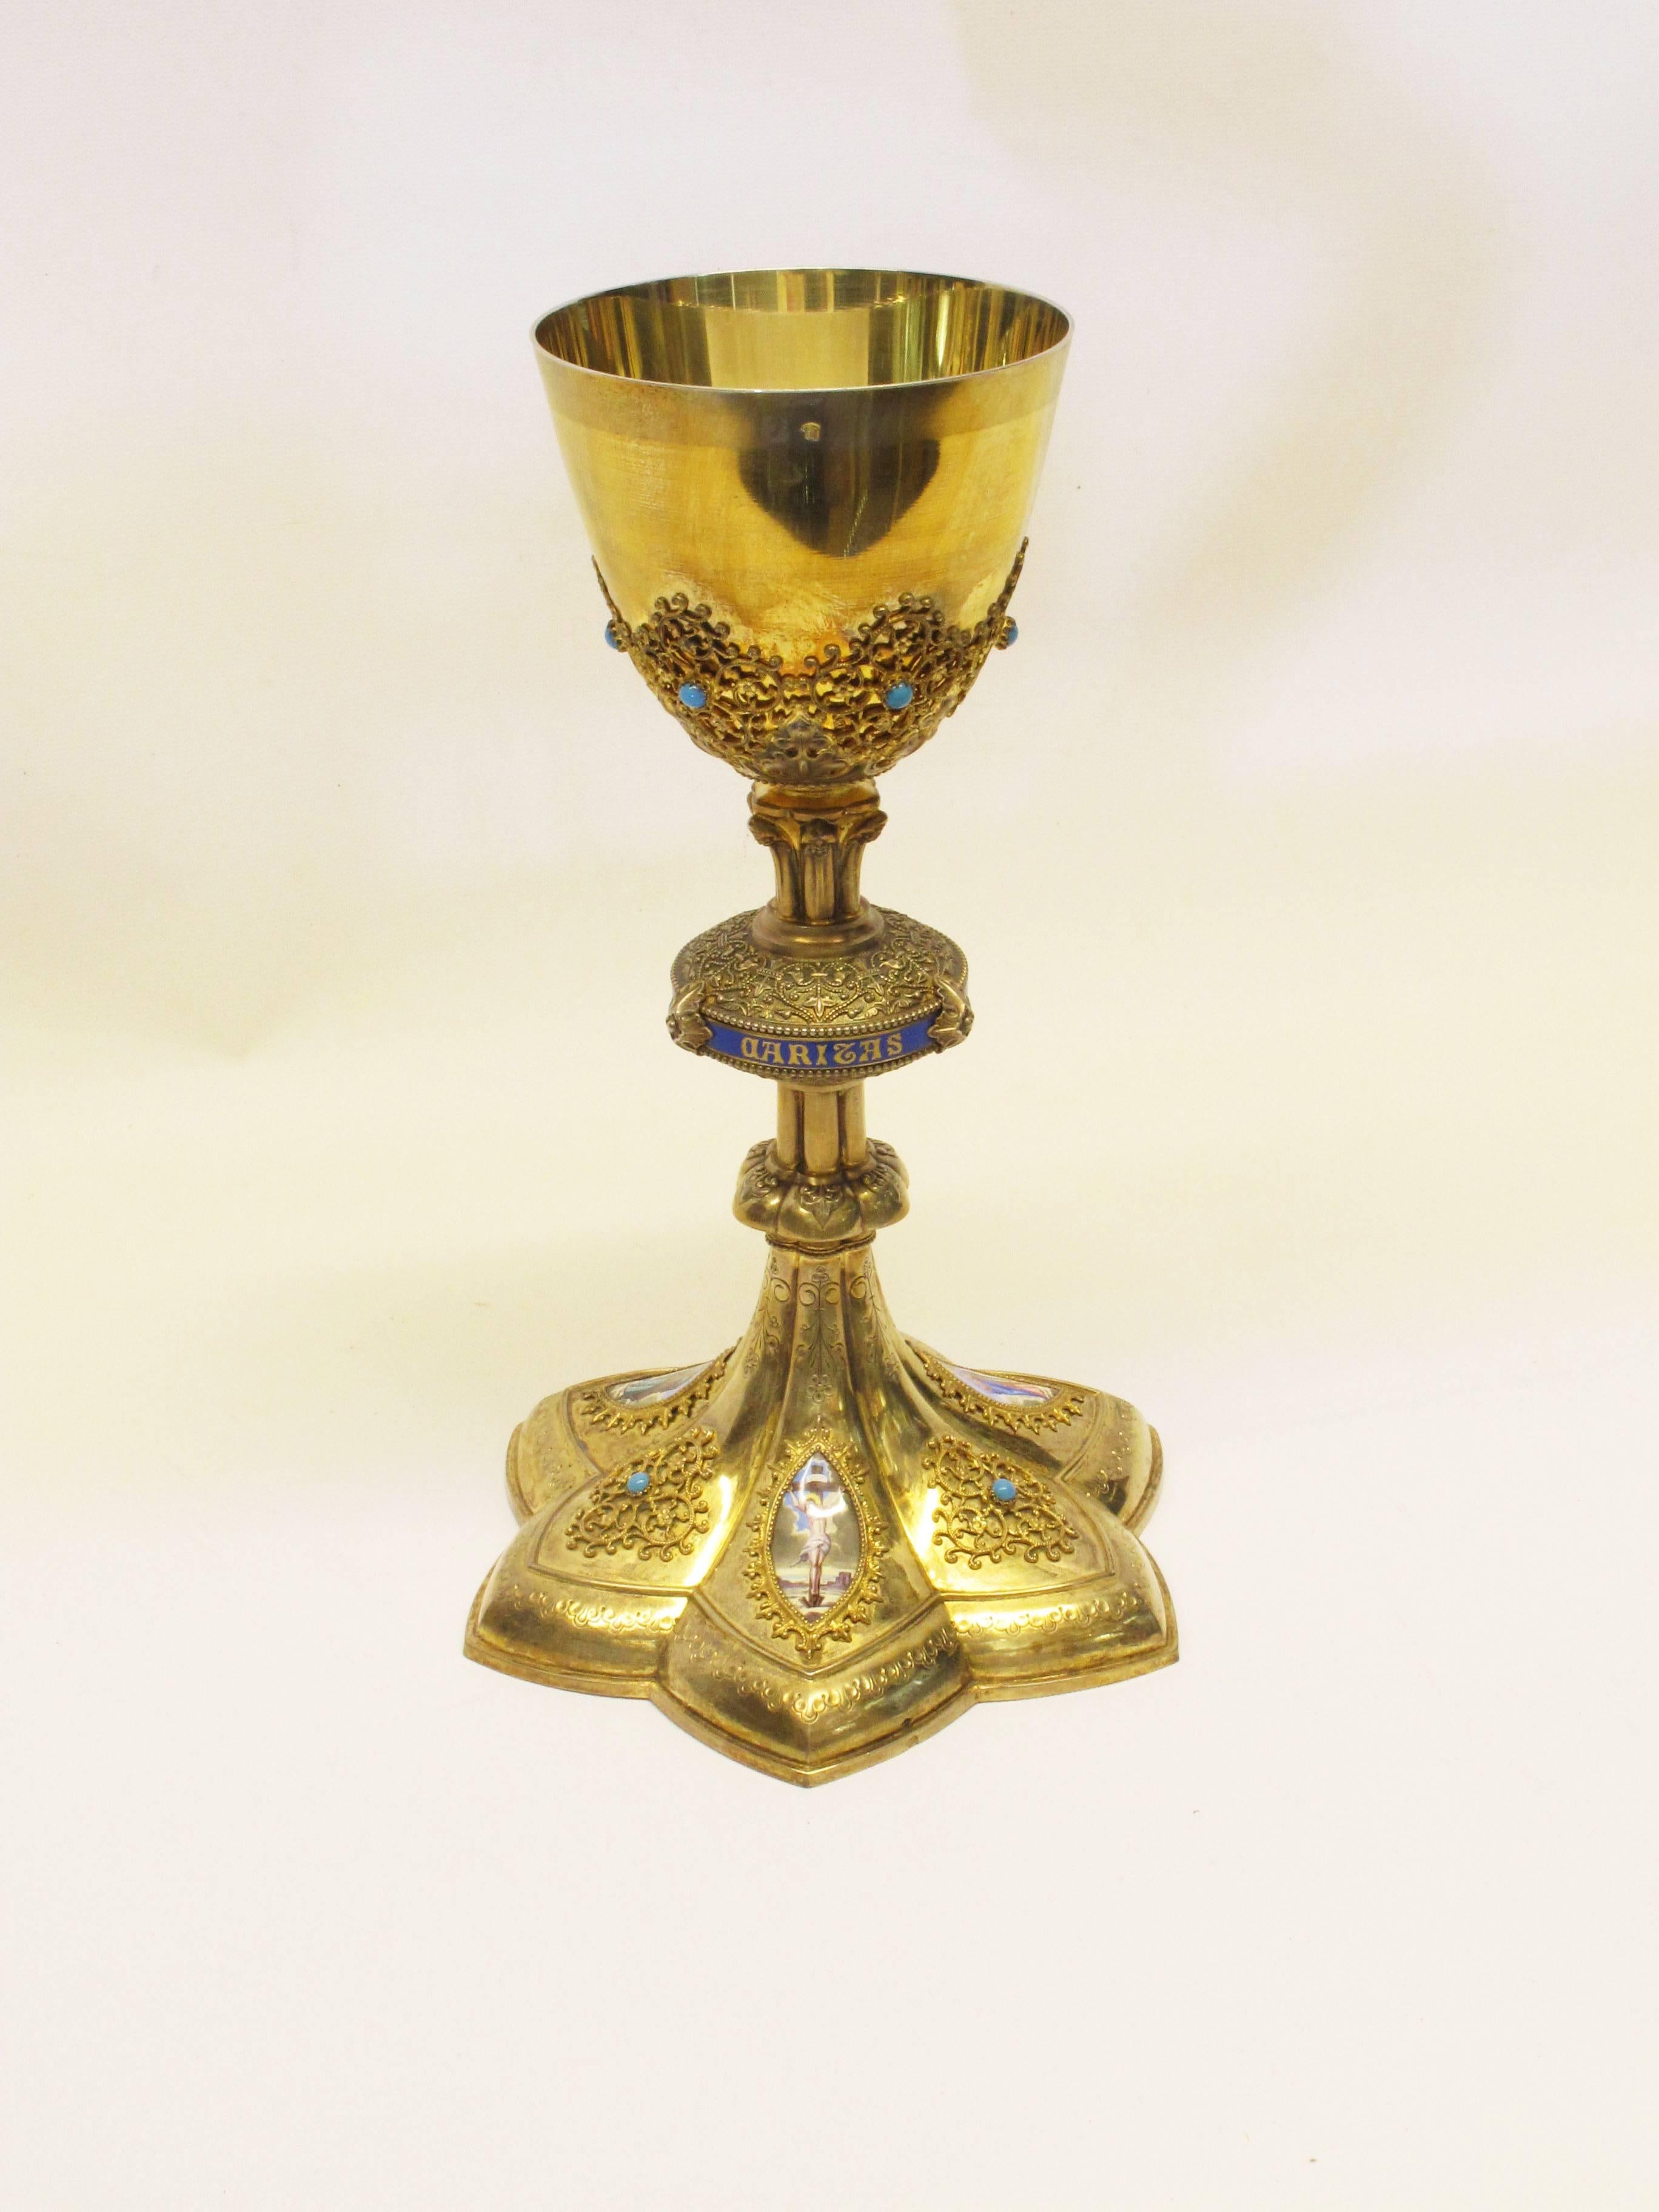 A magnificent neo-Gothic gilt 950 silver French chalice and paten from Lyons France, circa 1870 by Louis Gilles. The chalice features three hand-painted Limoges enamel plaques divided by applied filigree and cabochon turquoise gems. The central knop